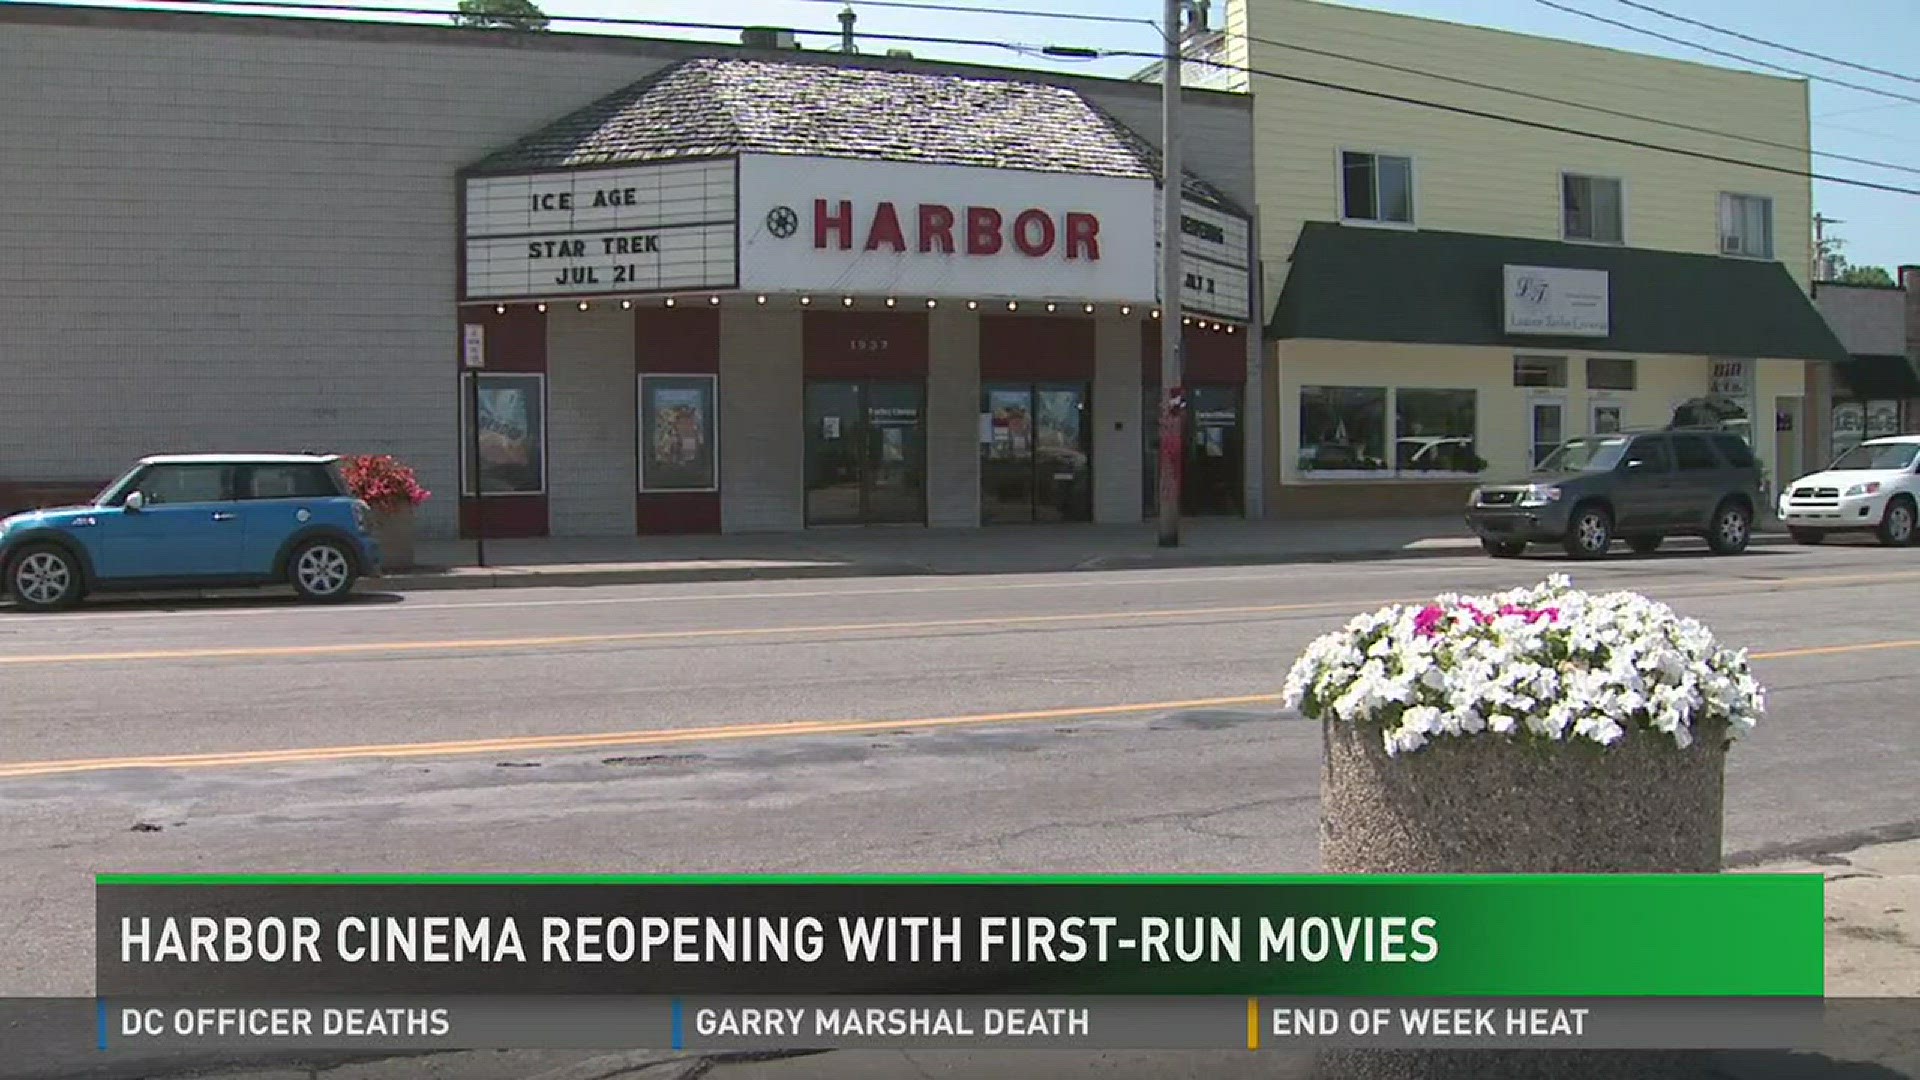 Harbor Cinema reopening with first-run movies